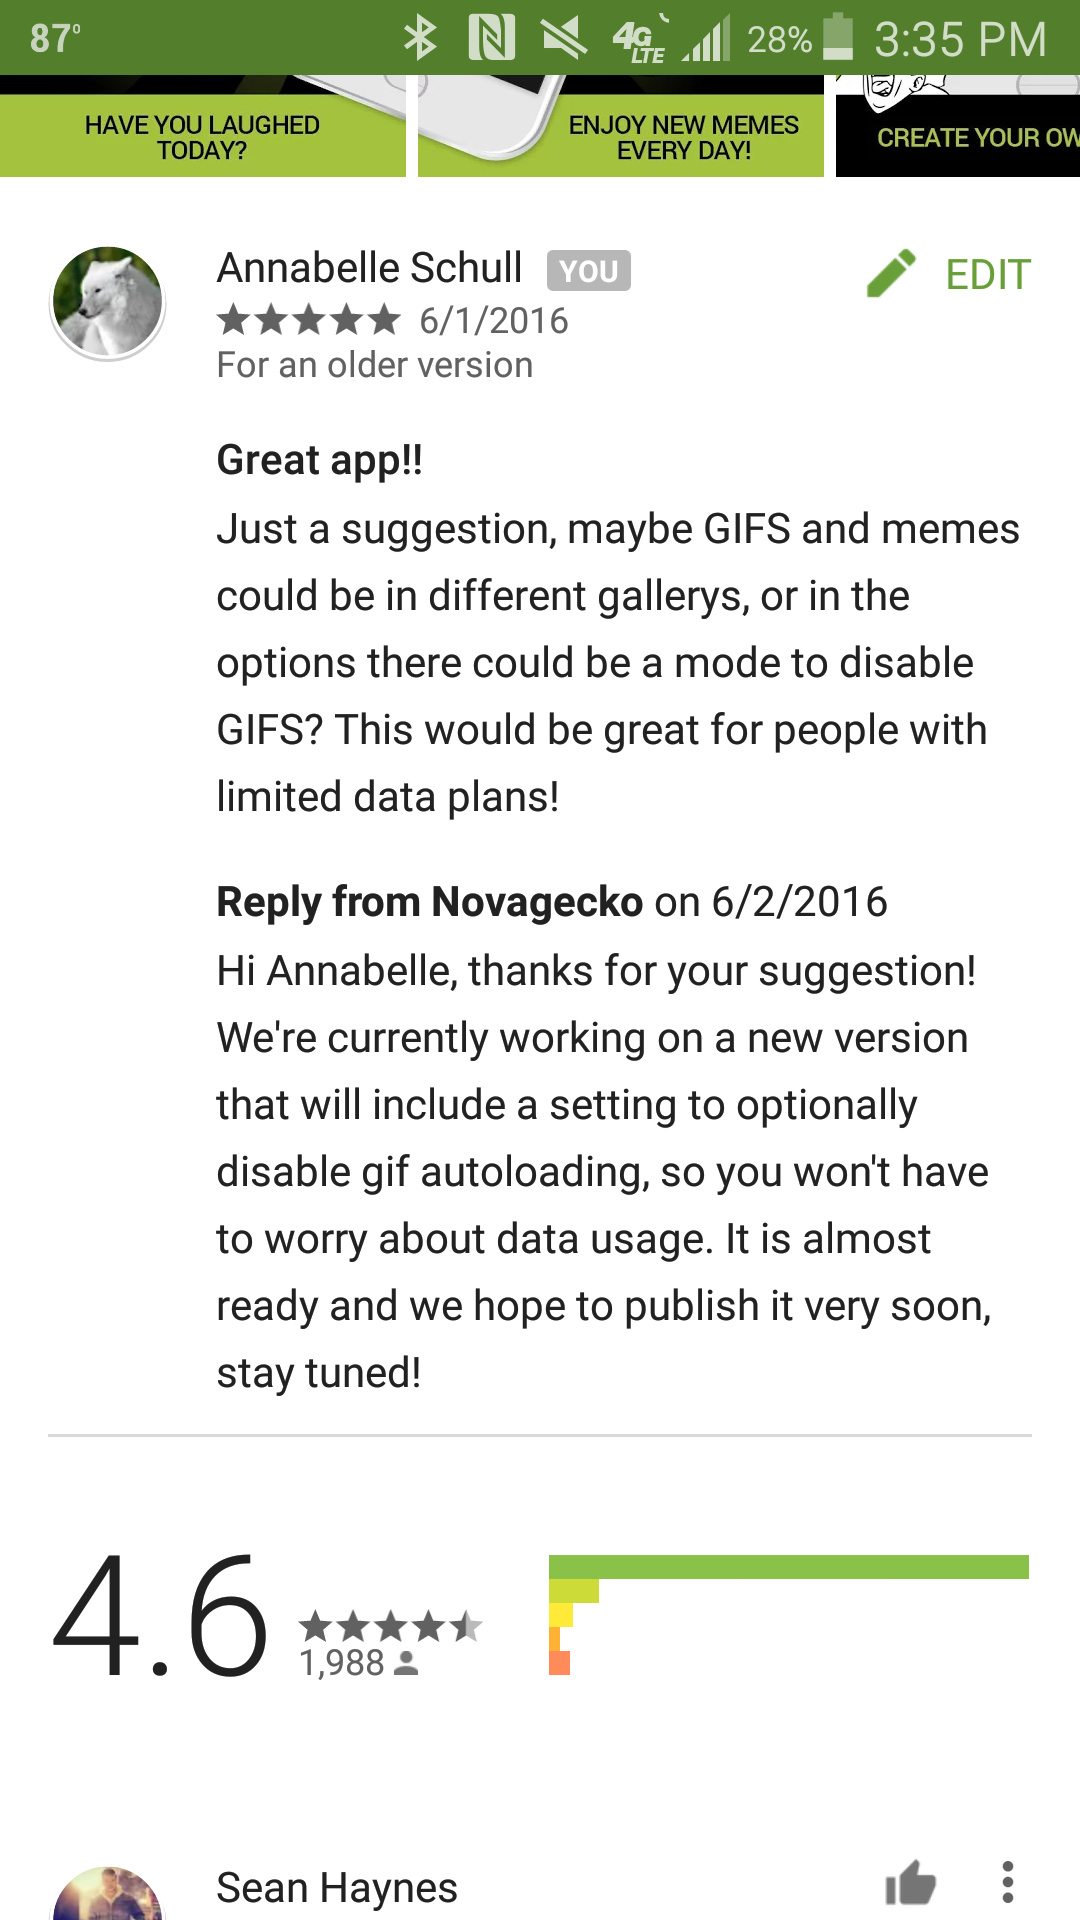 Good news for people with limited data plans! - meme